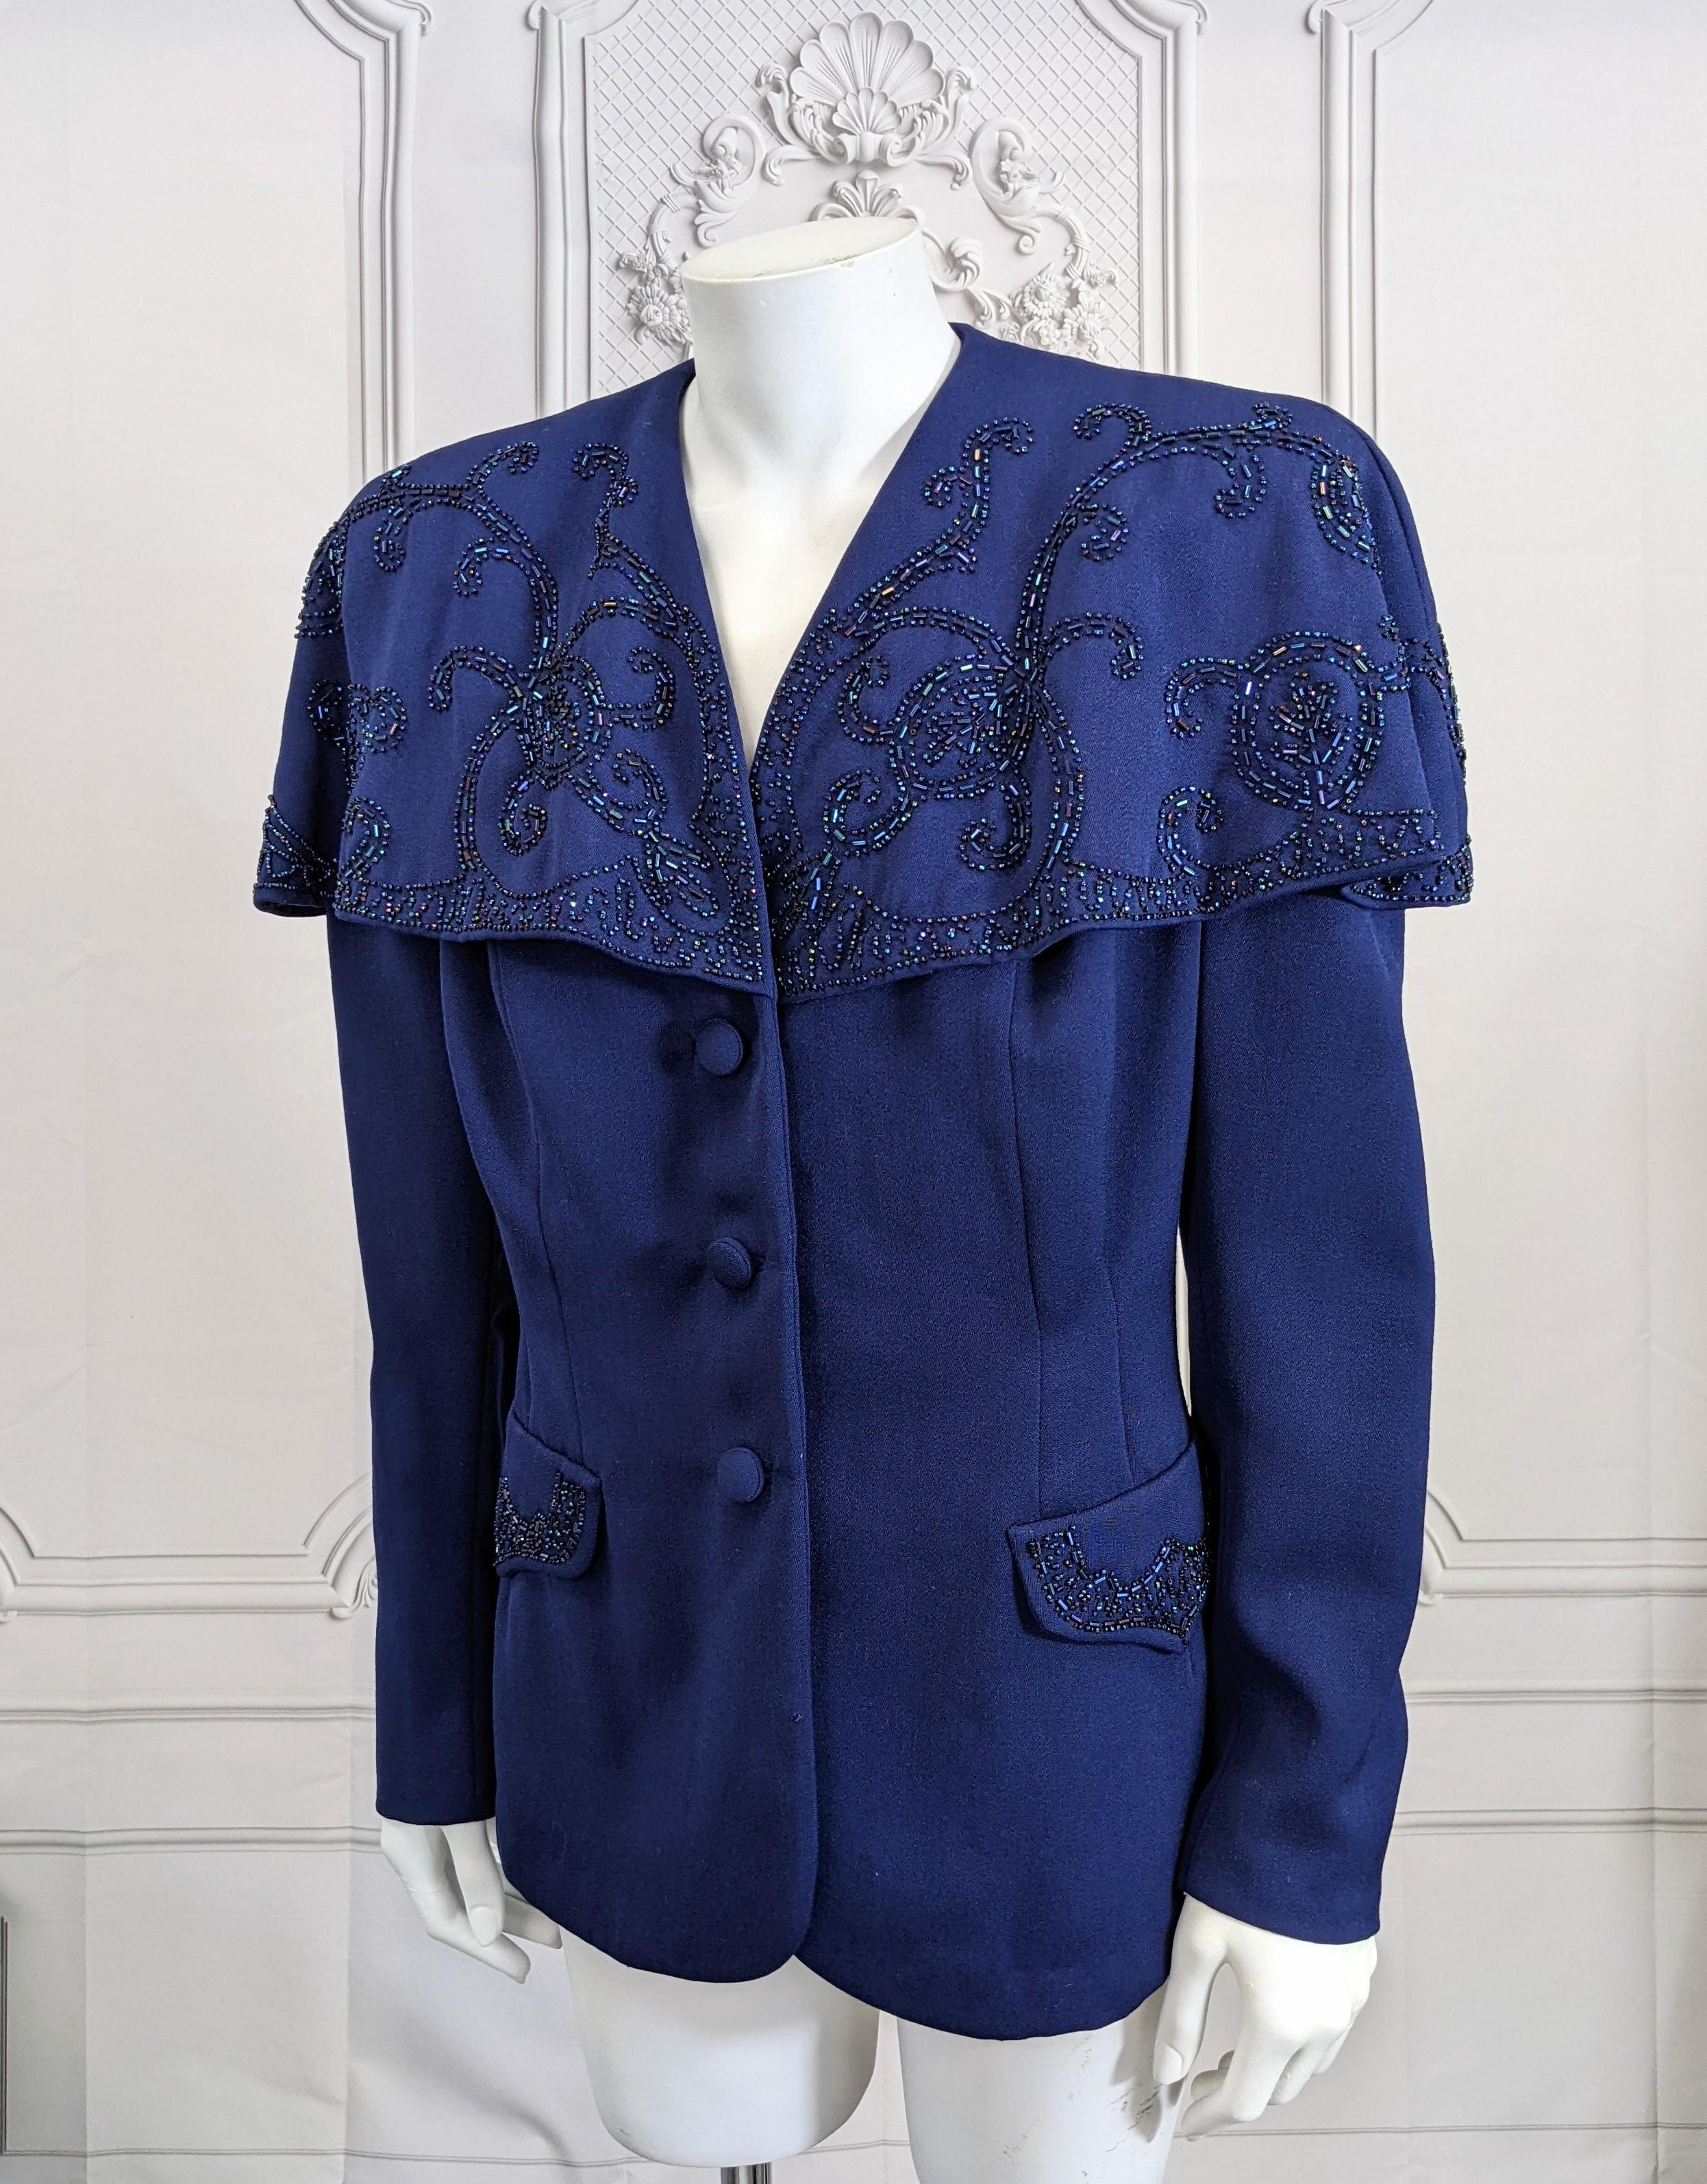 Attractive Wool Gabardine 1940's Jacket with Beaded Capelet in deep navy with aurora purple bugle bead swirl beading on attached capelet. 3 self covered buttons with fitted waist and strong shoulder pads. Bead work as well on faux pocket flaps.